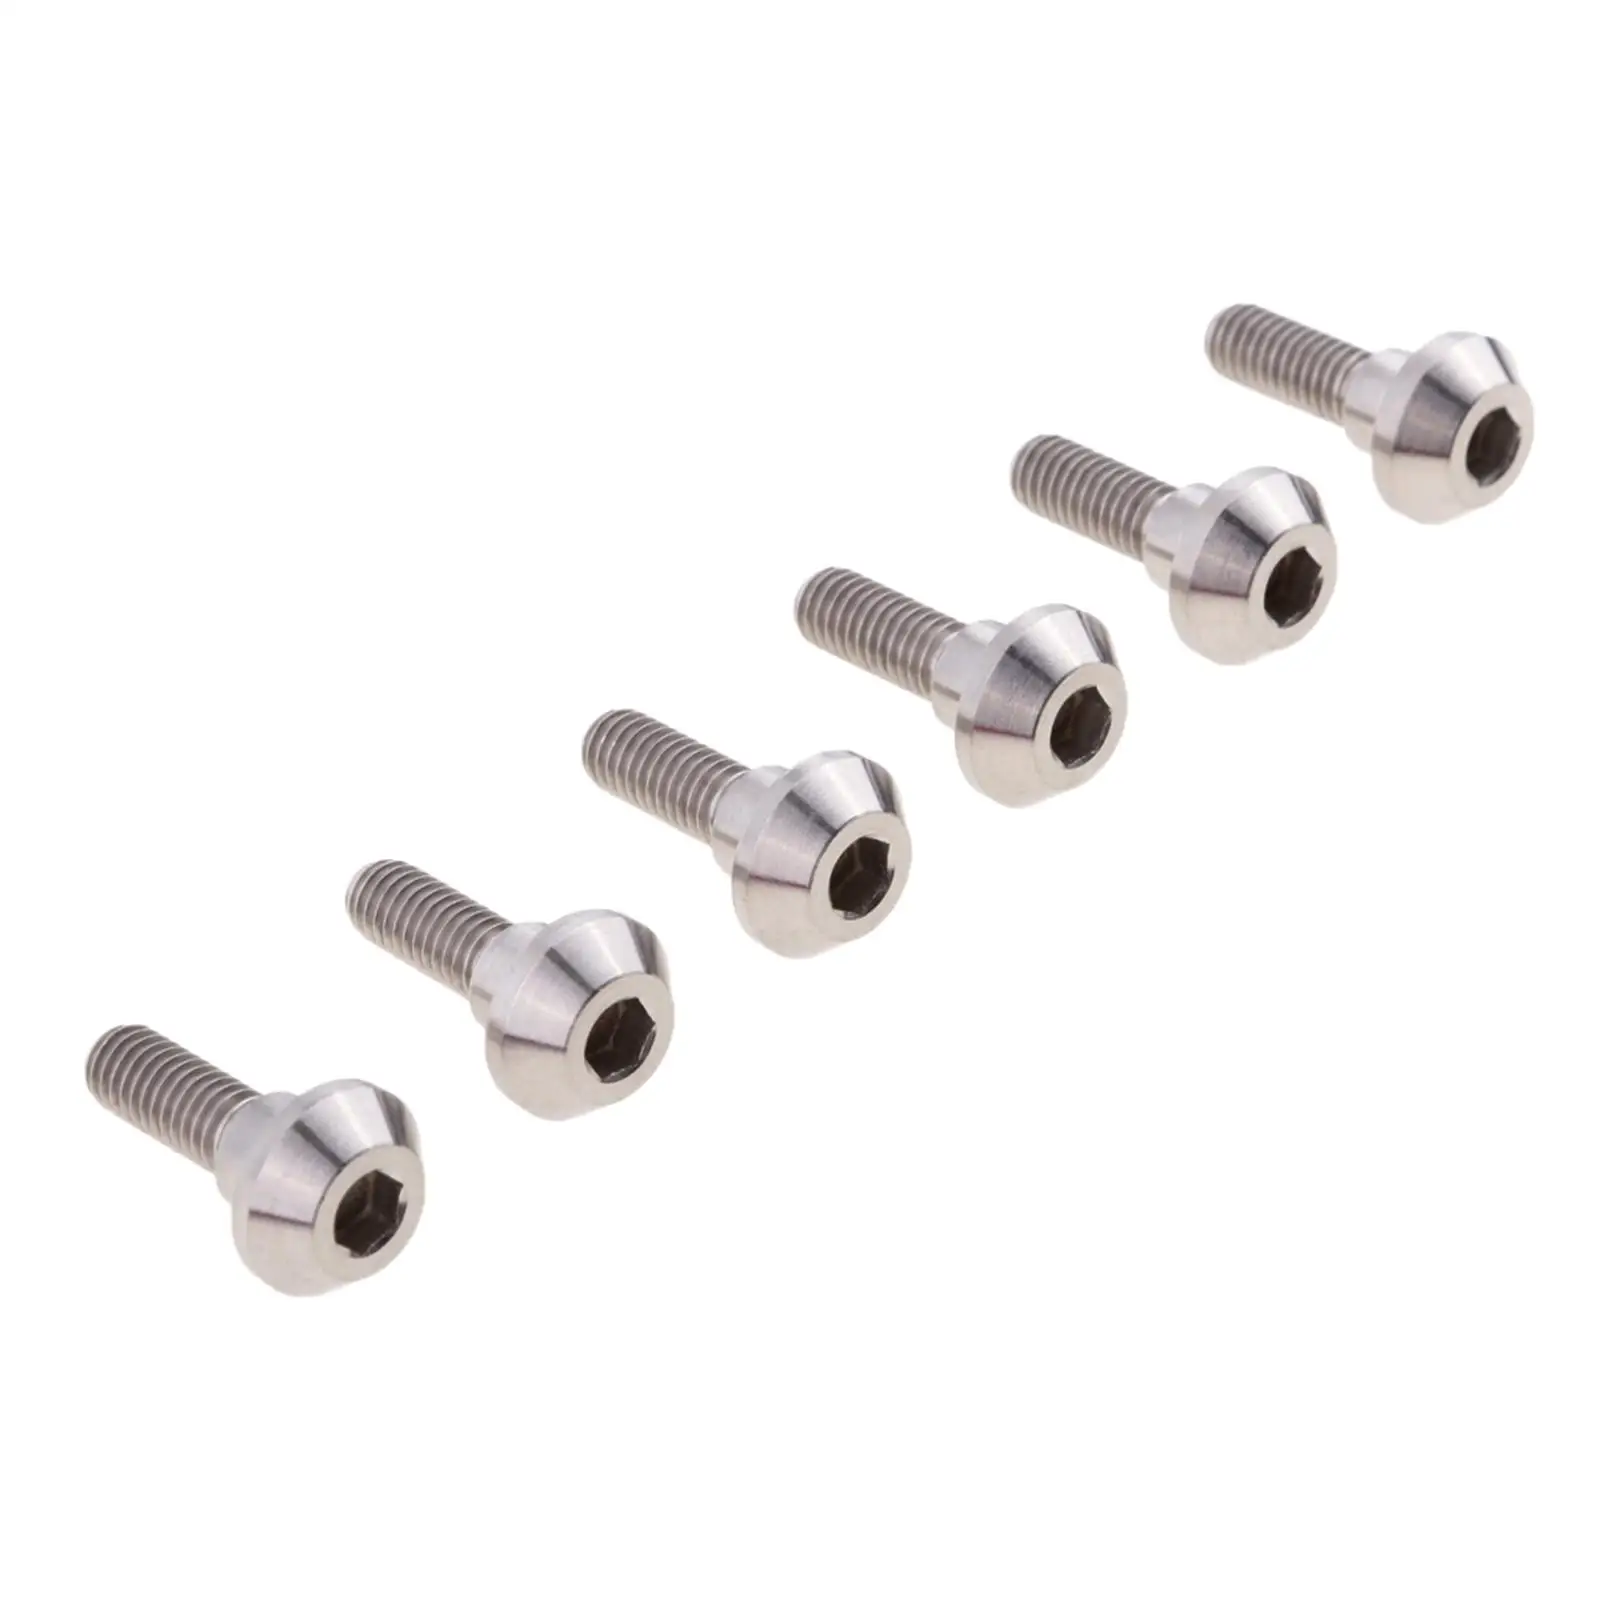 12 Pieces M6x20mm Titanium/Ti Disc Brake Rotor Bolts for 1